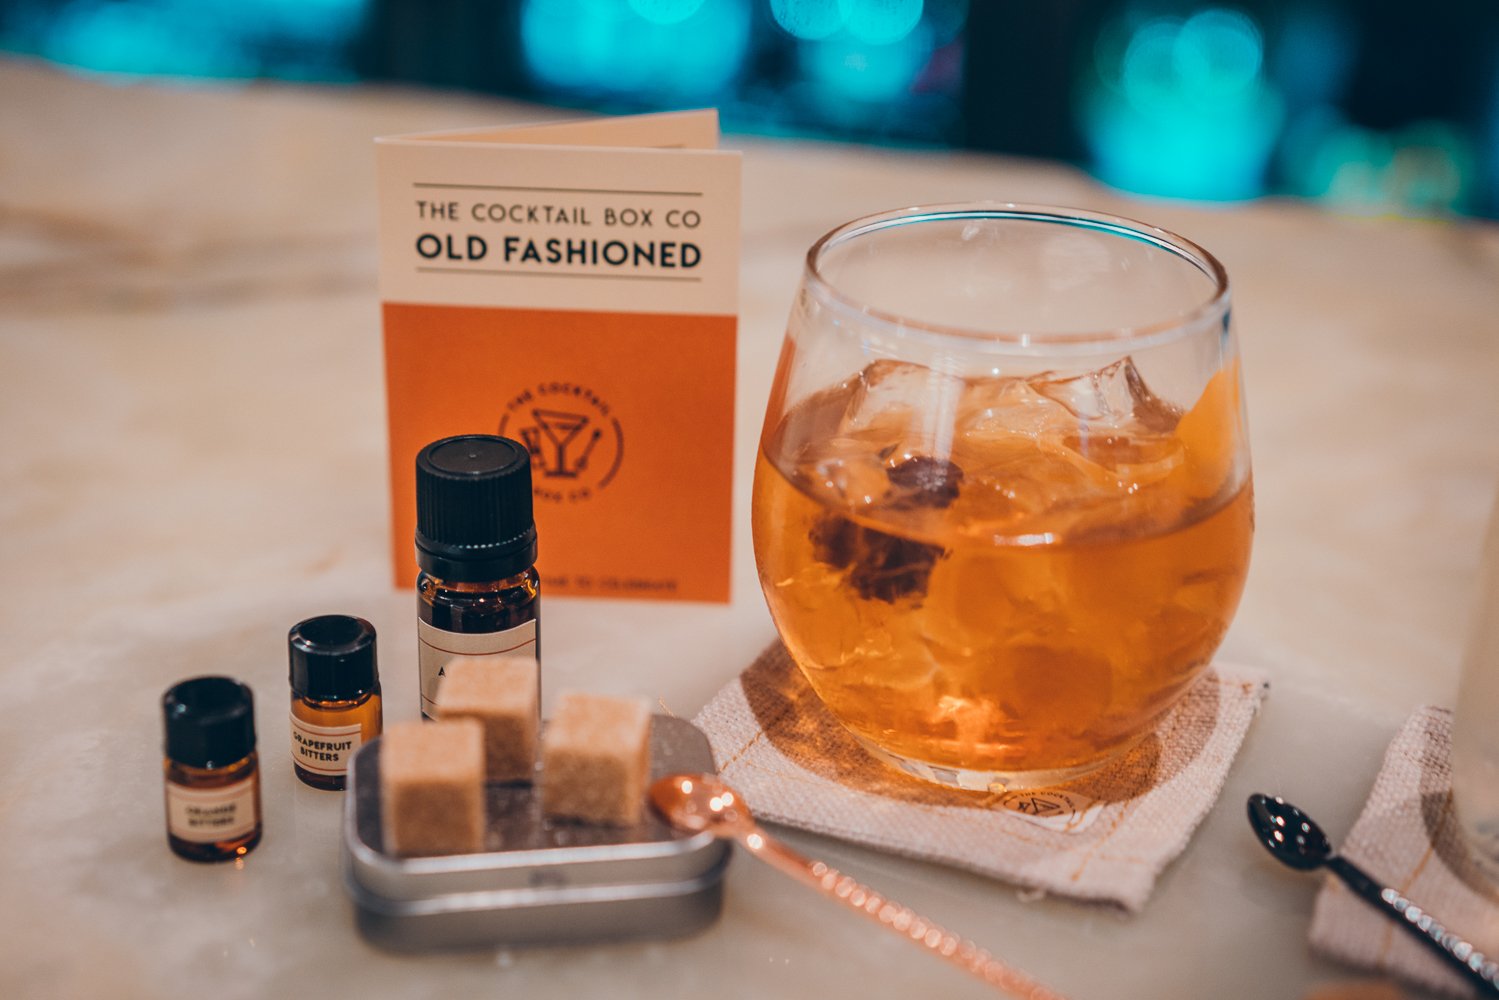 Set of 2 – Old Fashioned Cocktail Kits – The Cocktail Box Co.